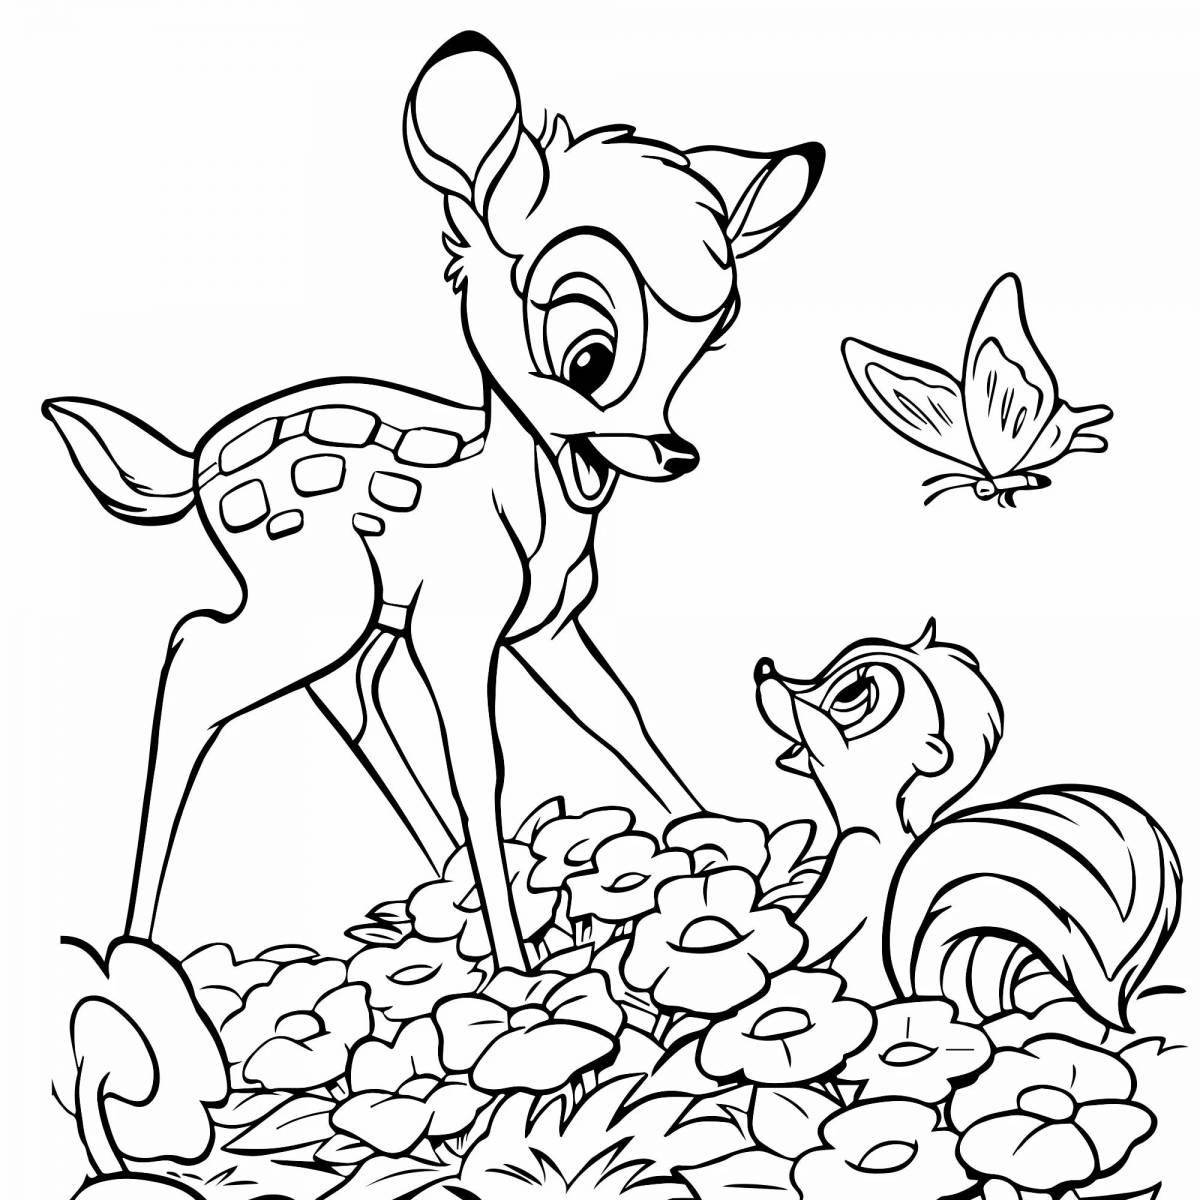 A fun bambi coloring book for kids 3-4 years old